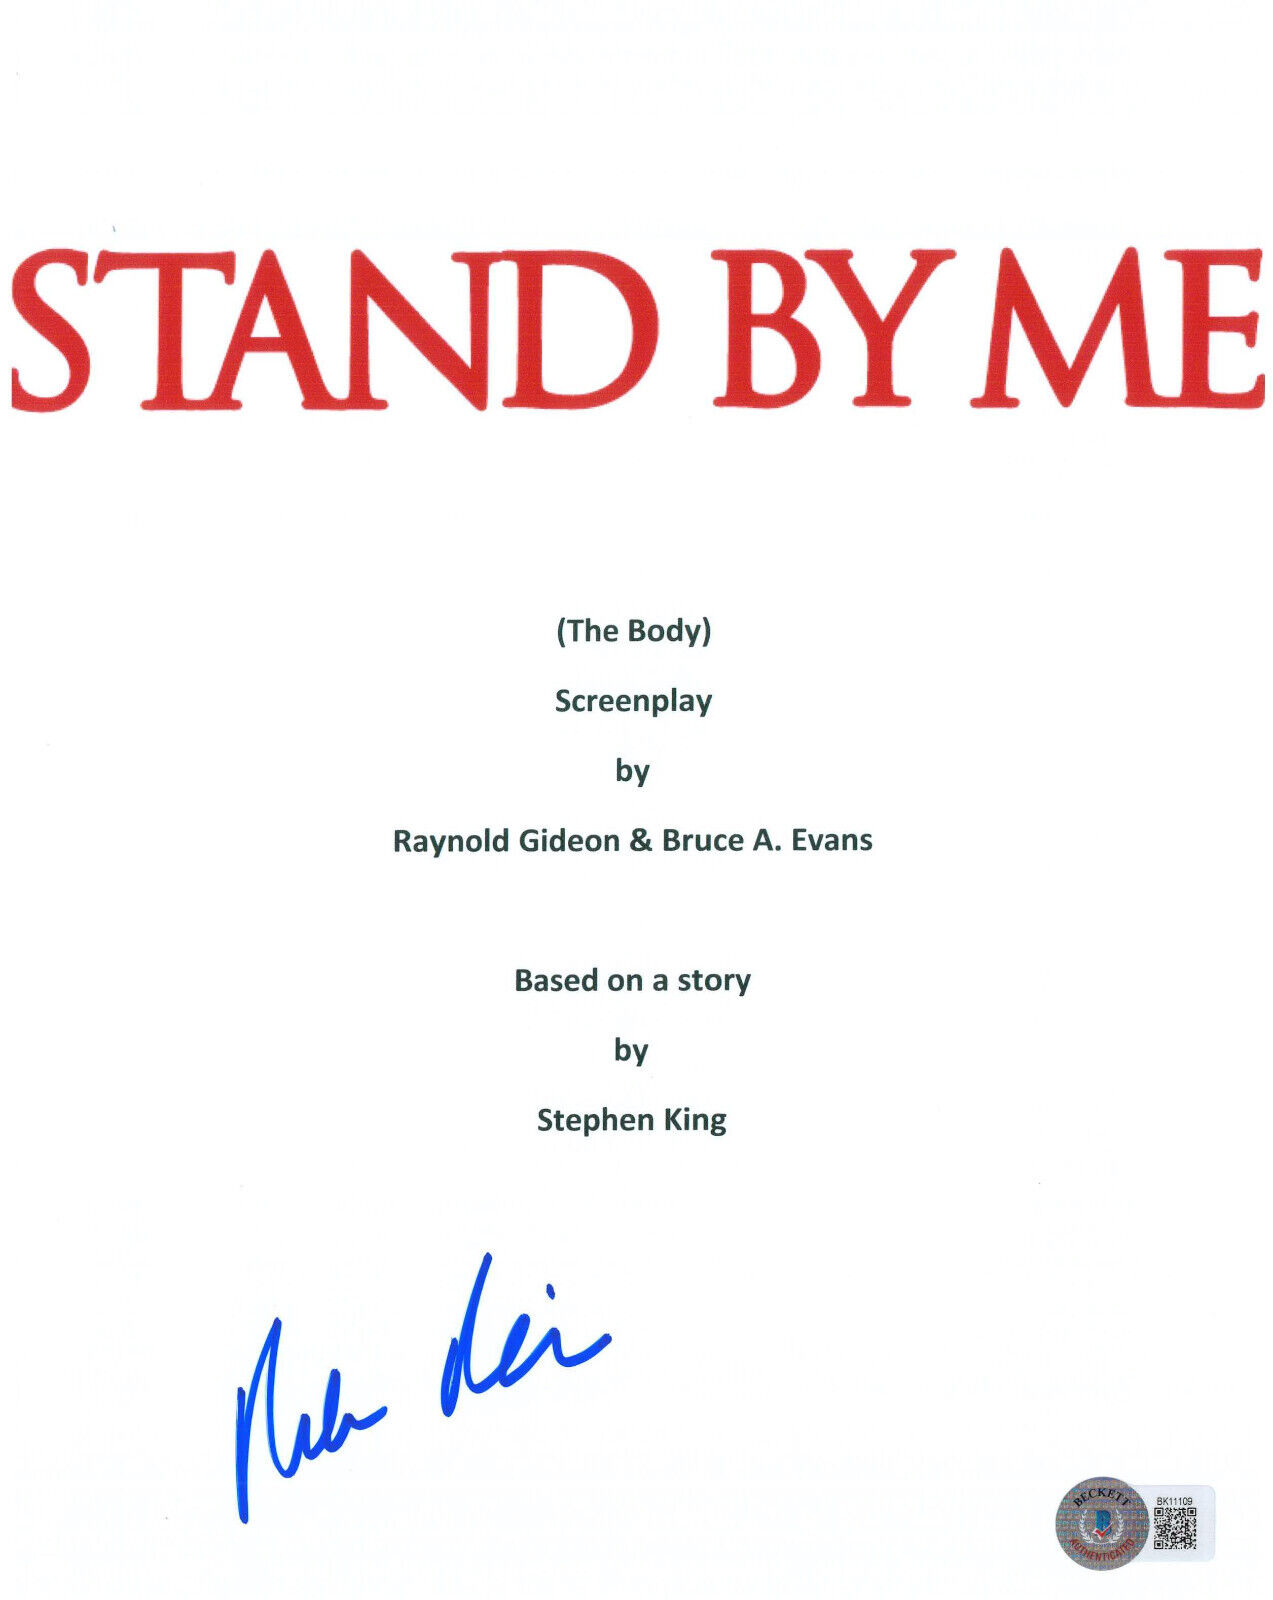 ROB REINER SIGNED AUTOGRAPH STAND BY ME FULL SCRIPT BECKETT BAS